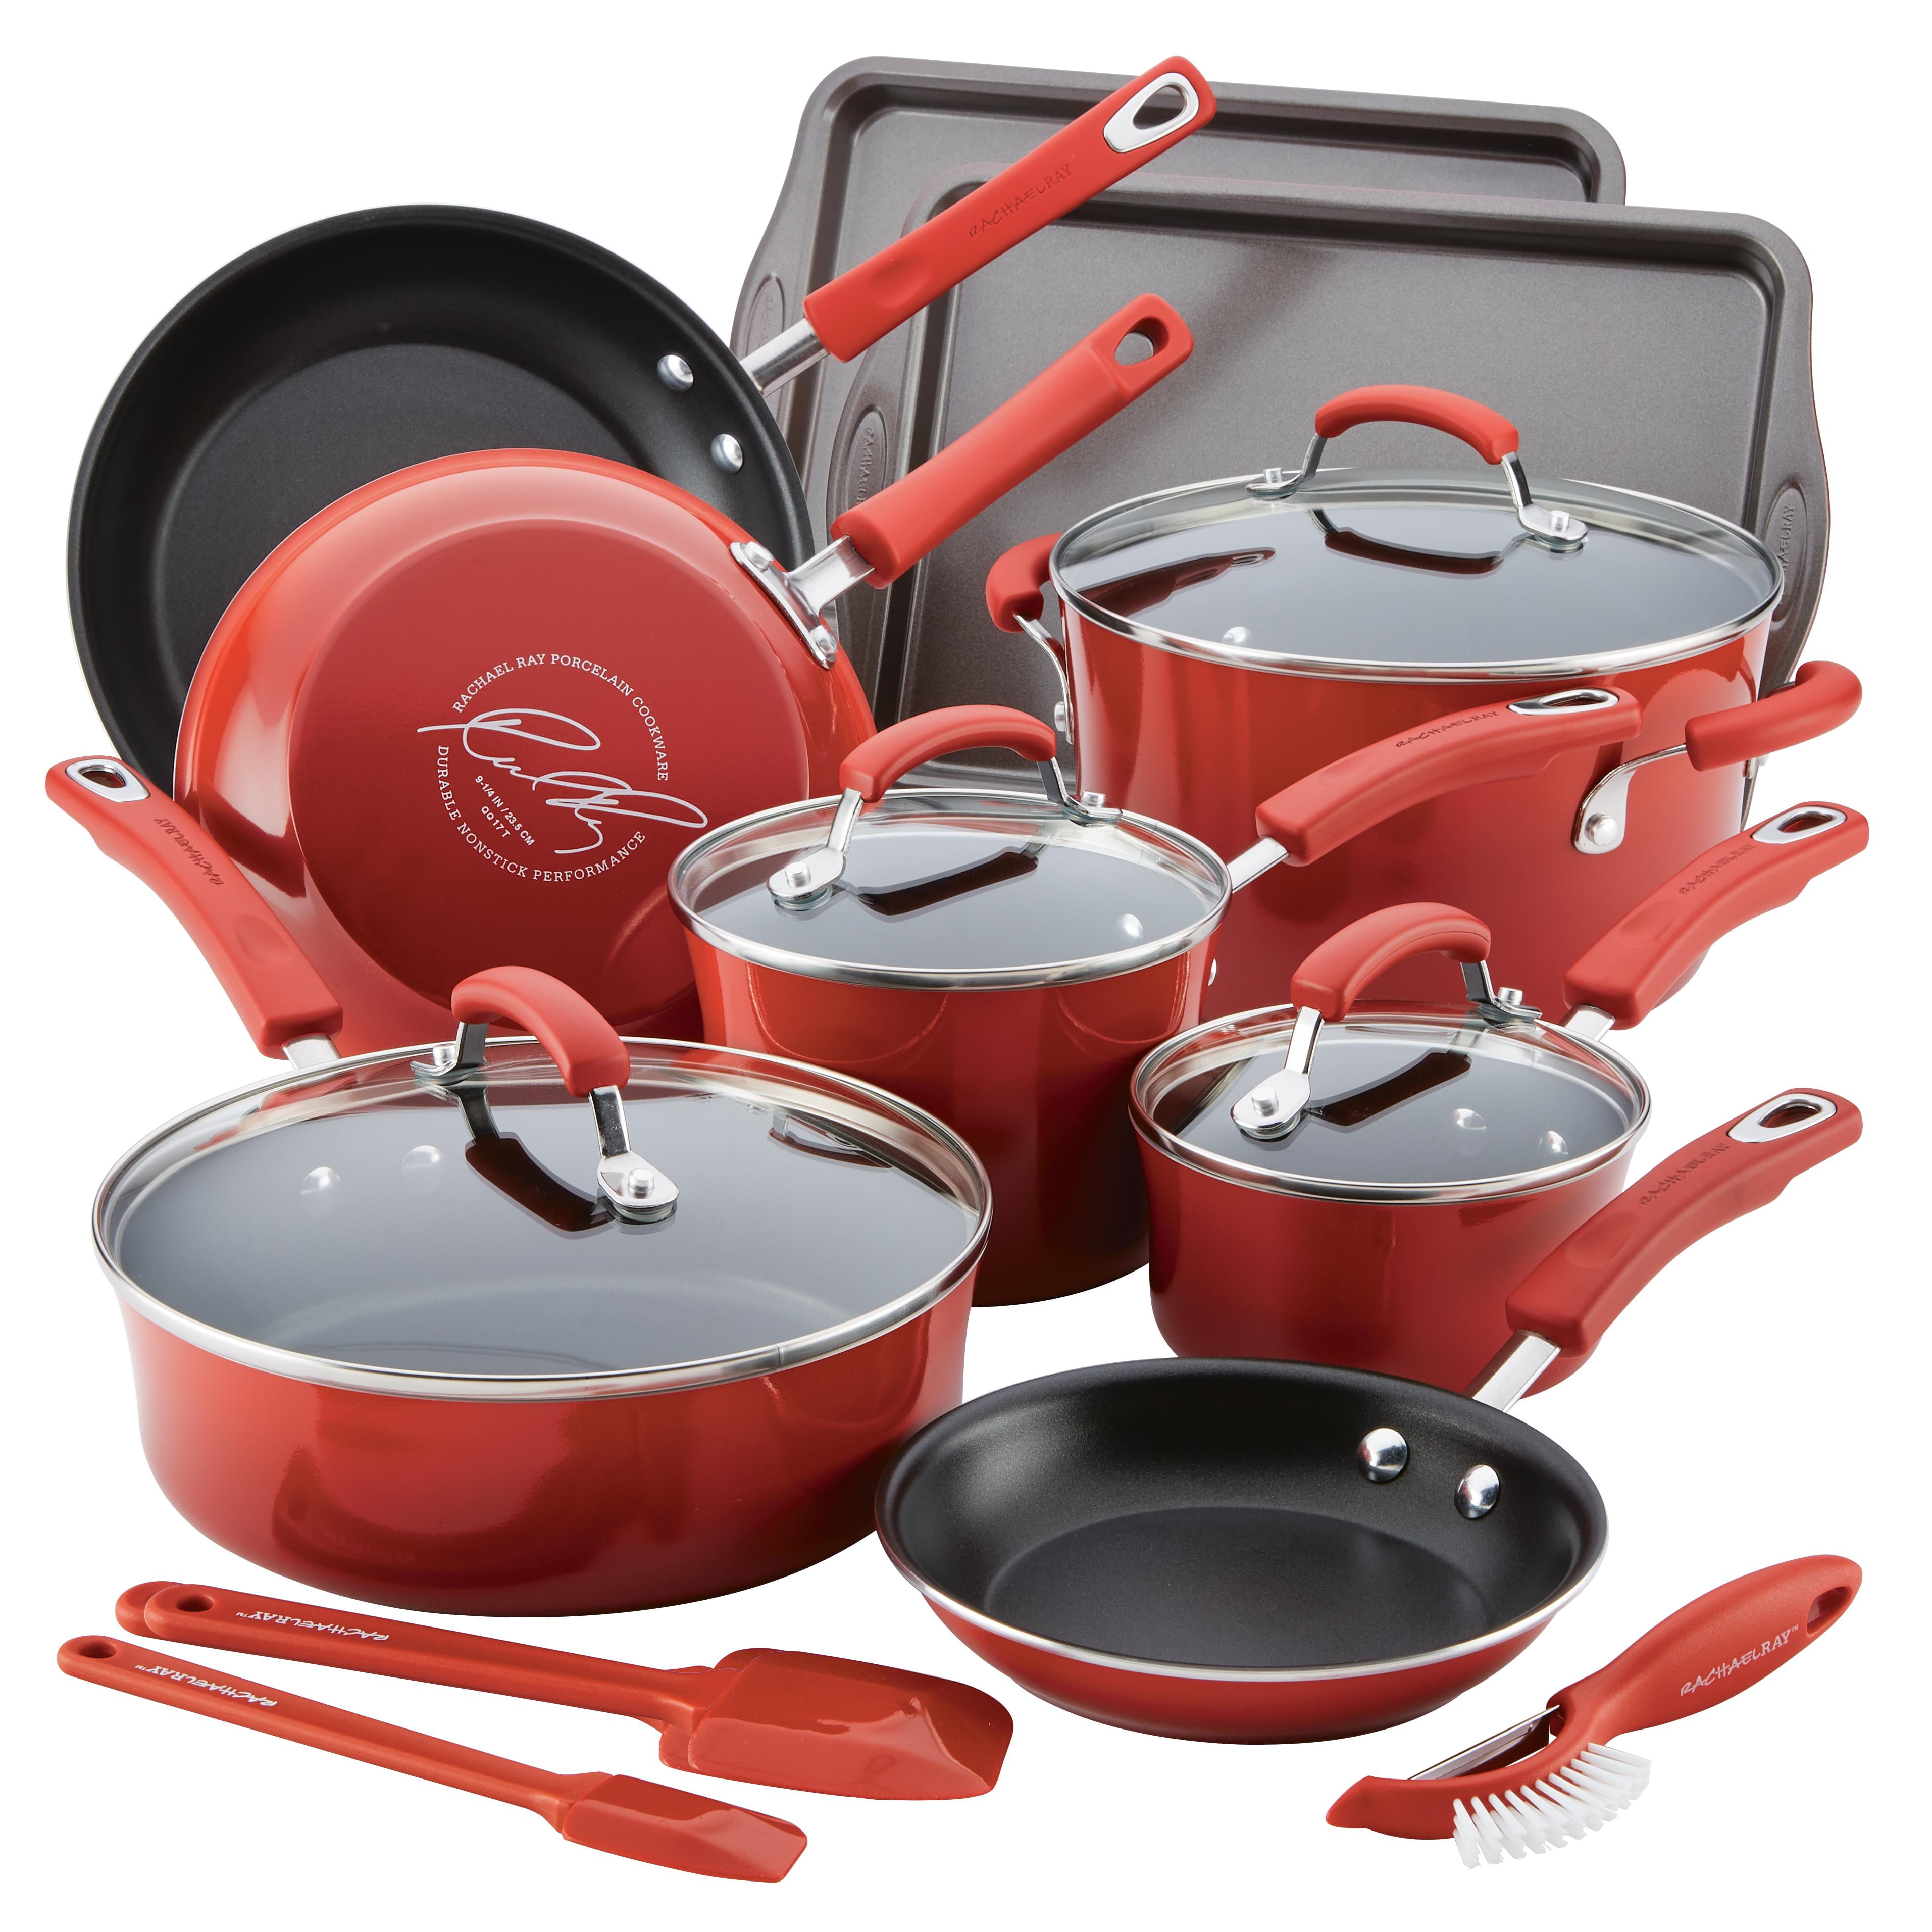  LEGENDARY-YES 18 Piece Nonstick Pots & Pans Cookware Set  Kitchen Kitchenware Cooking NEW (RED): Home & Kitchen